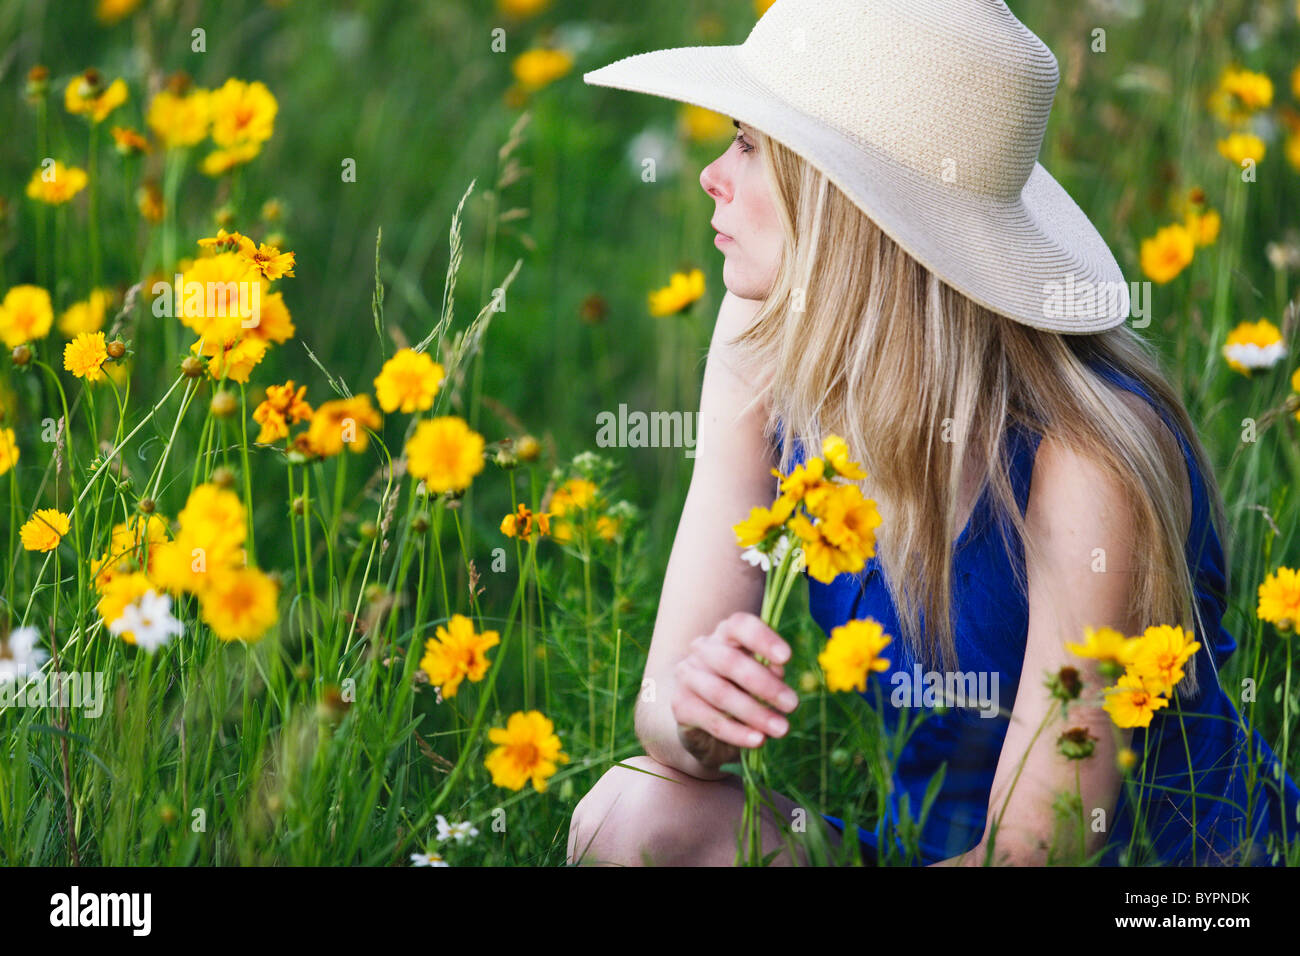 Young Woman Kneeling in a Meadow with Wildflowers and Looking Away, New Jersey, USA Stock Photo